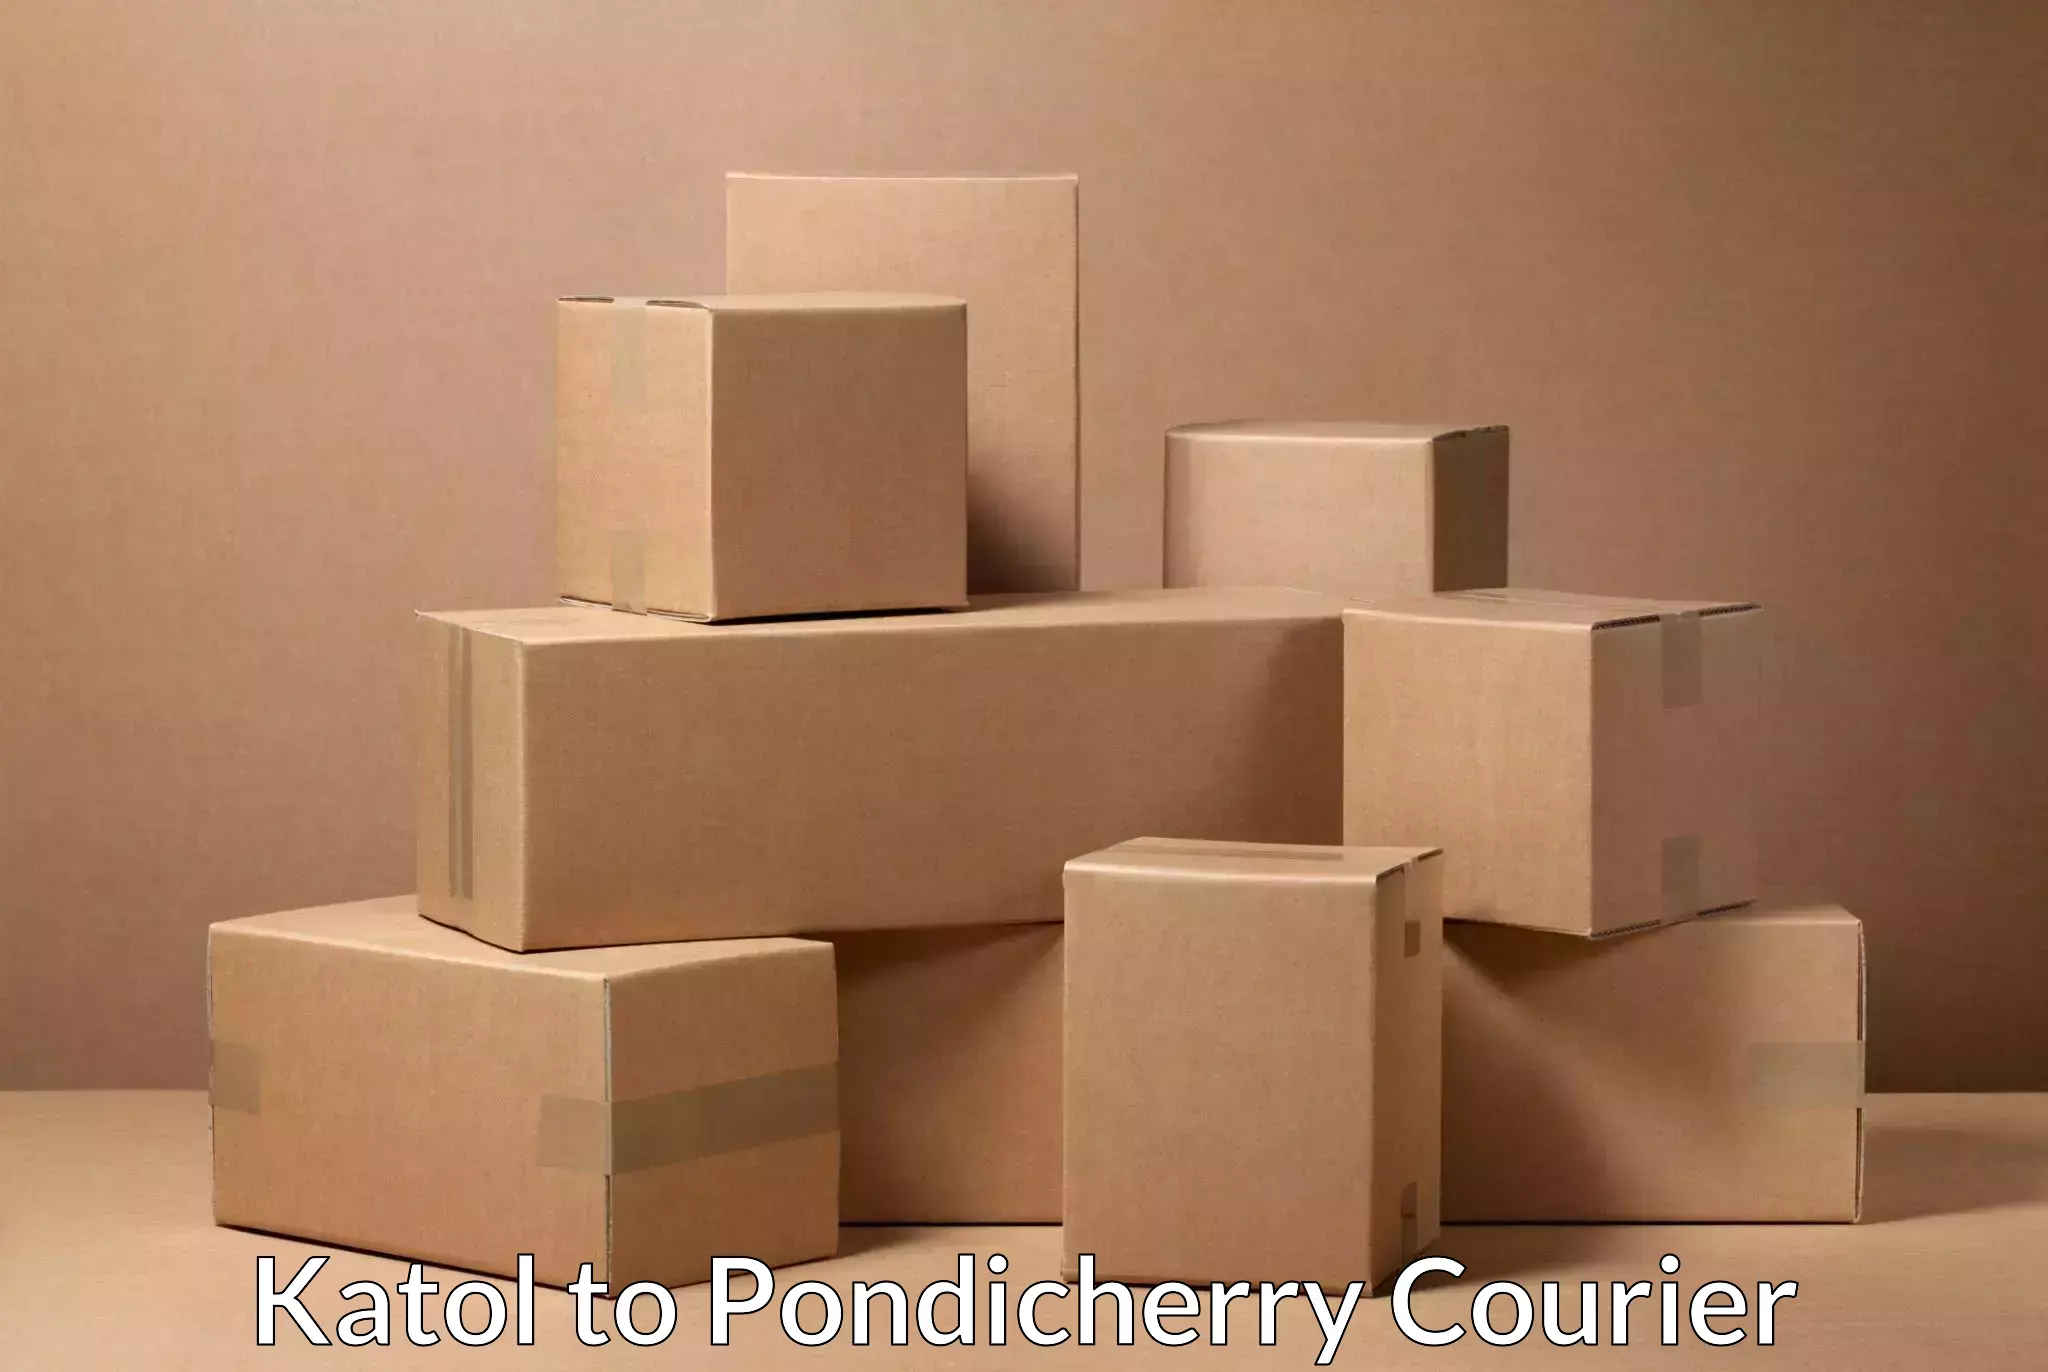 Large package courier Katol to Pondicherry